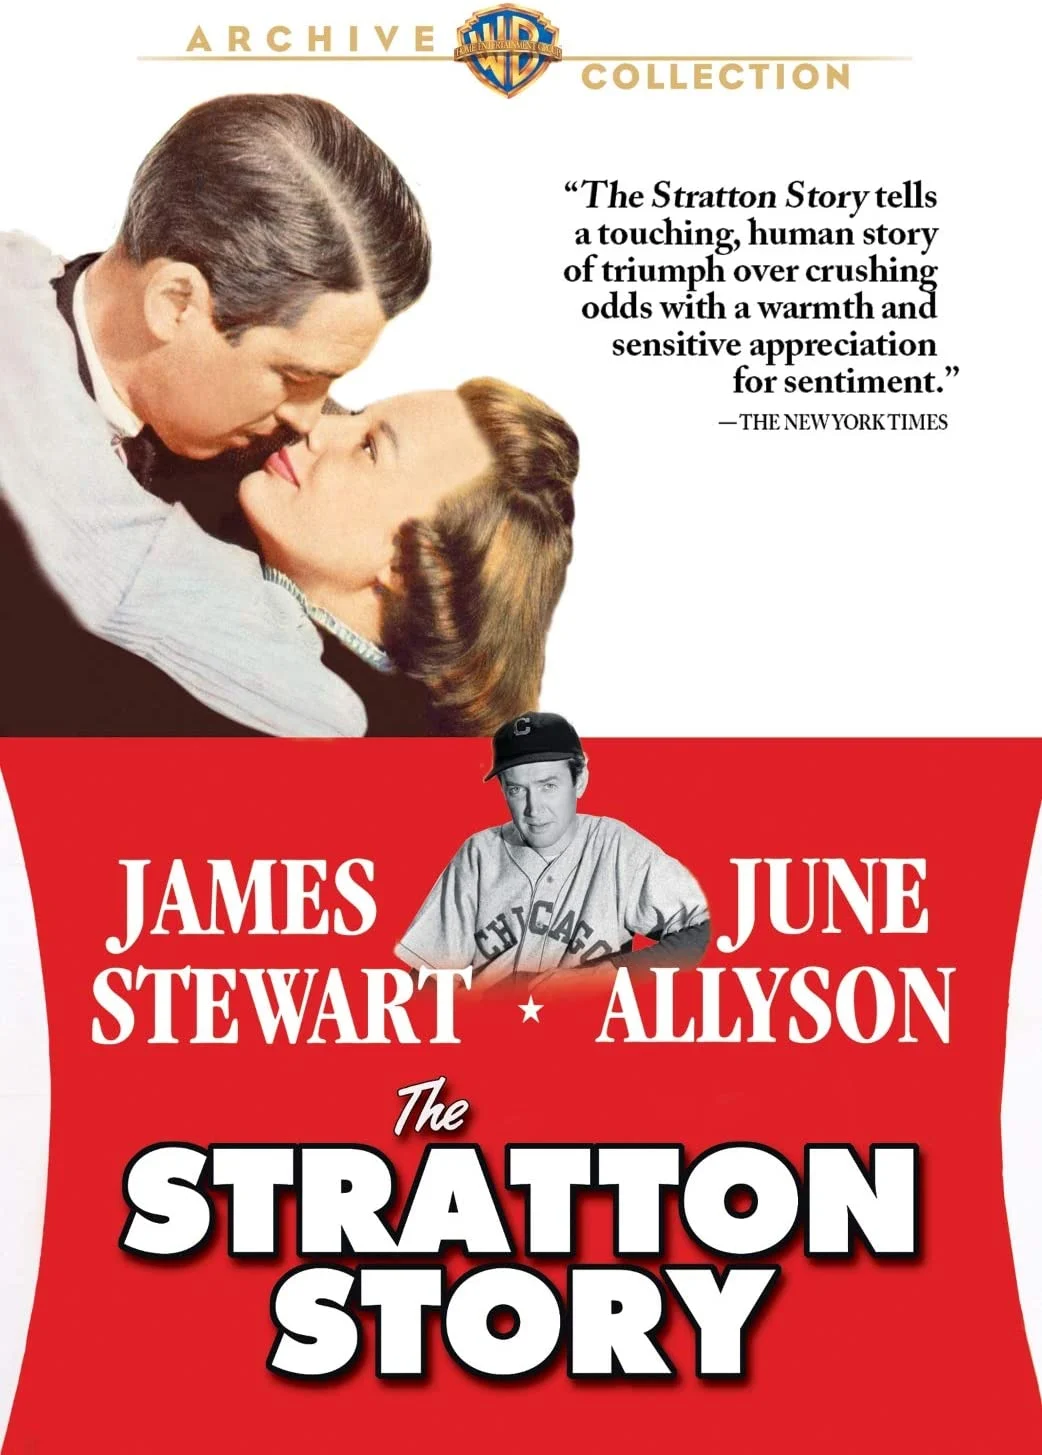 Stratton Story, The (DVD) (MOD) on MovieShack